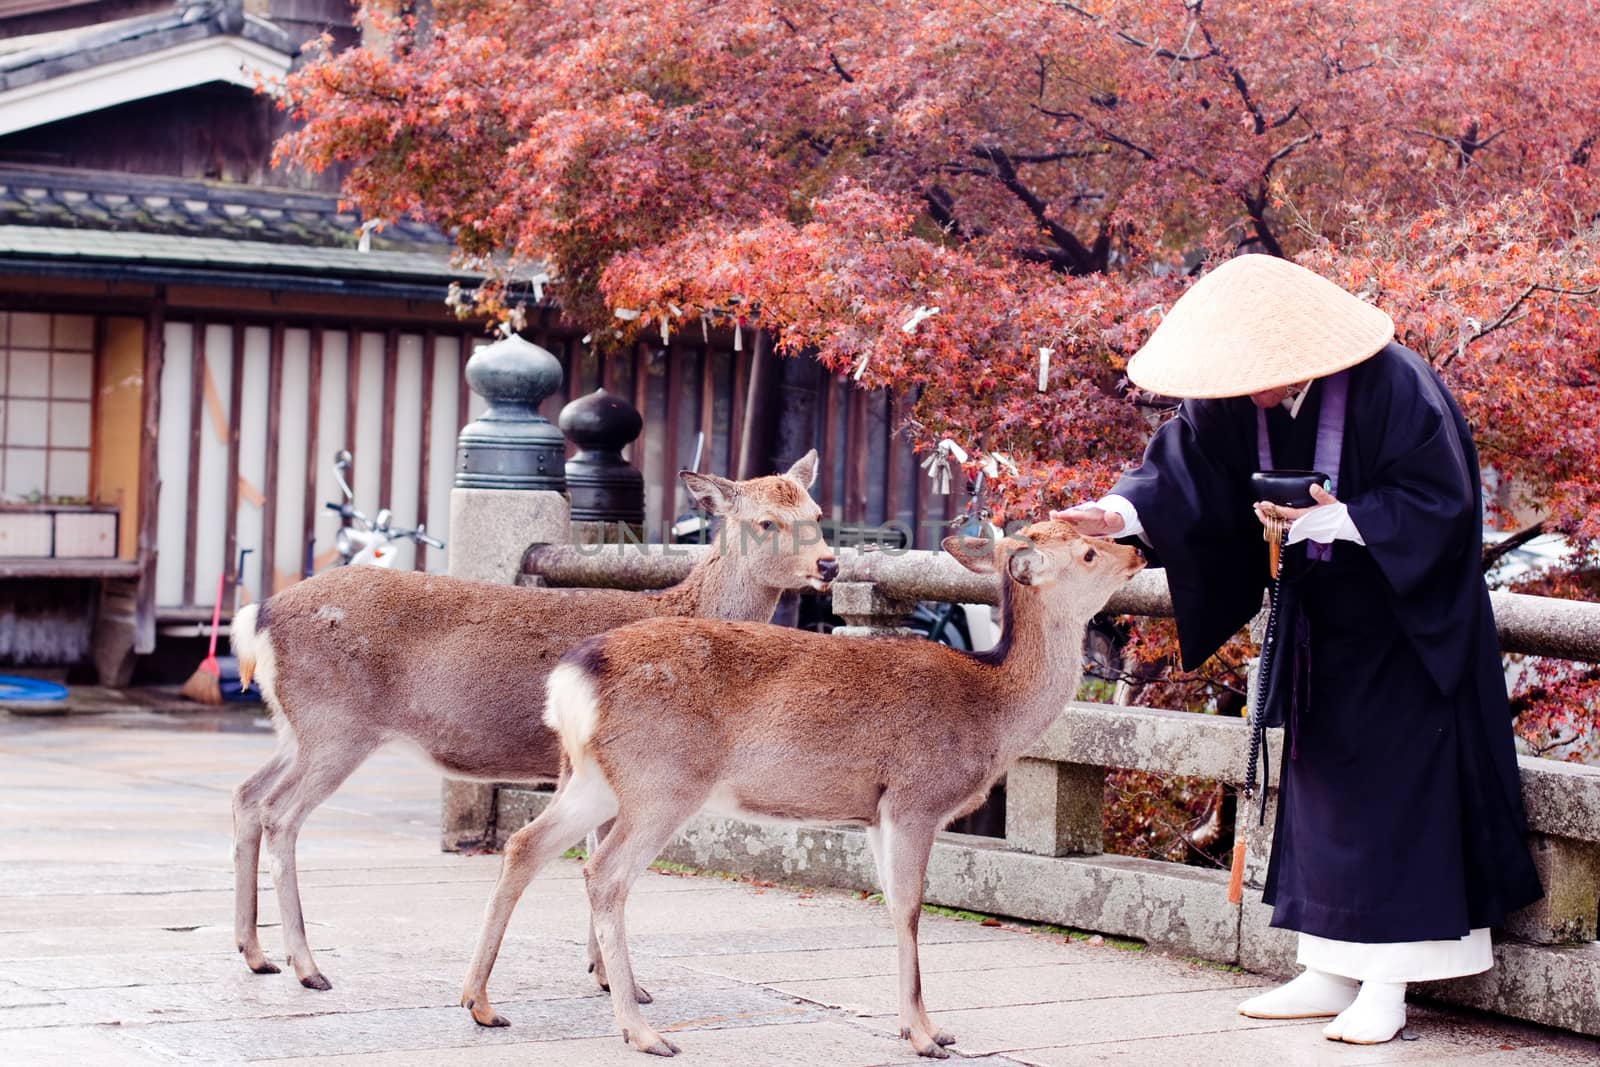 Buddhist monk and two deers by foaloce